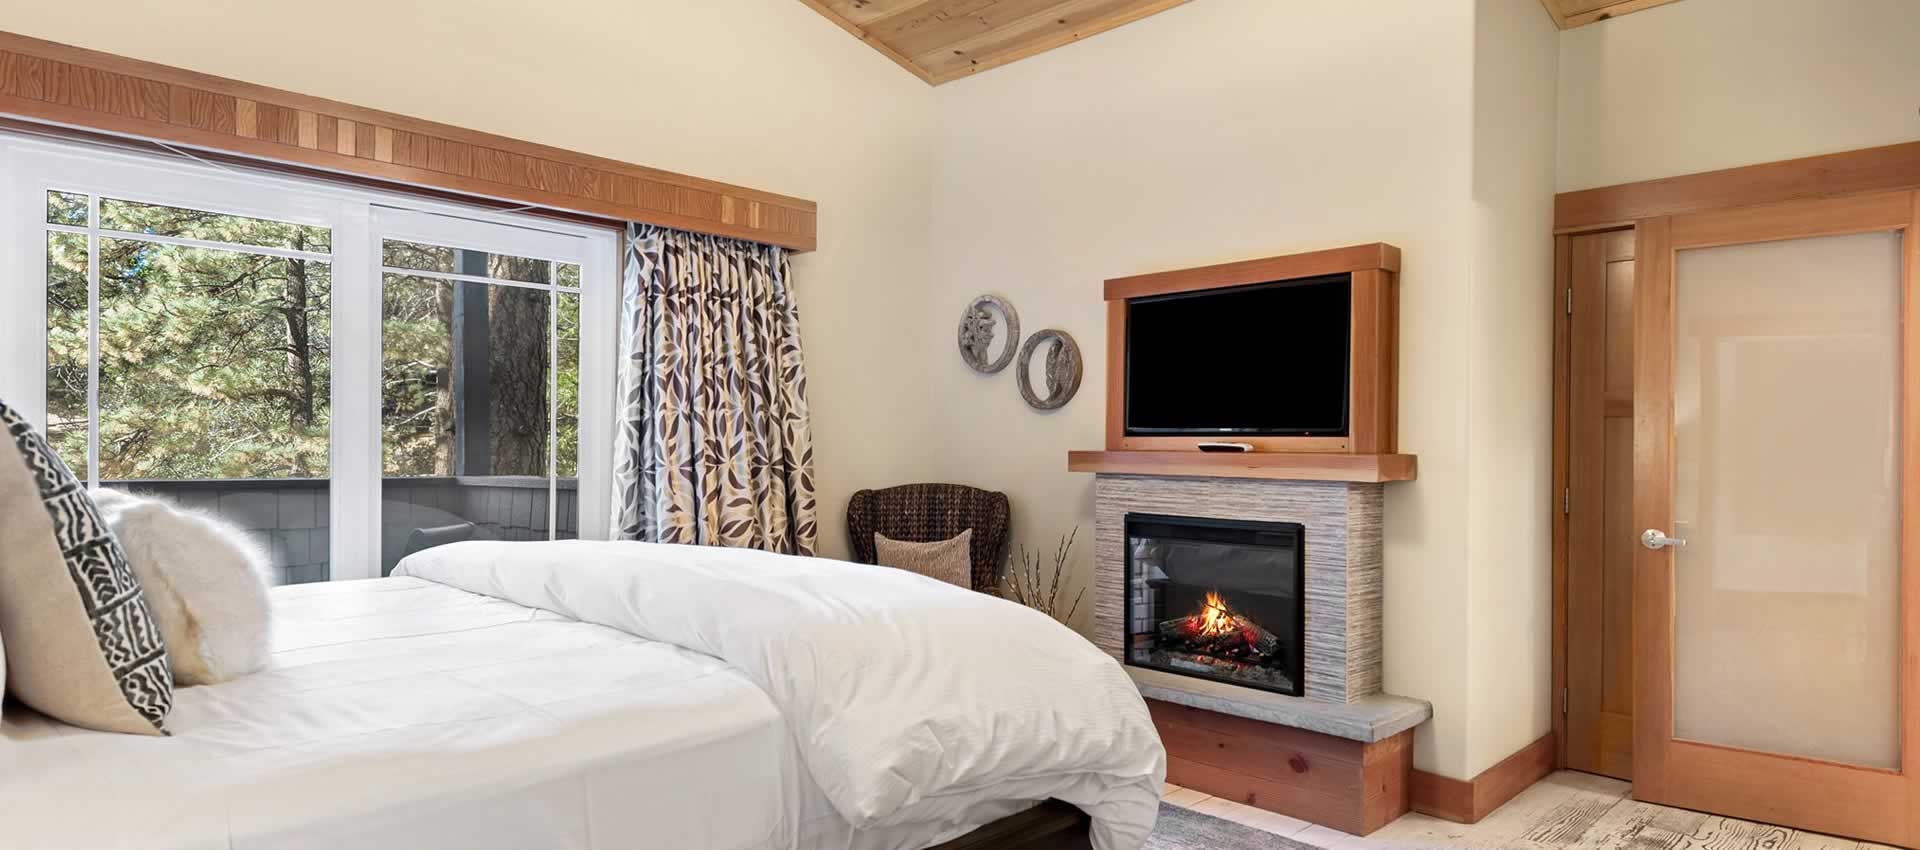 Tranquility room bed and fireplace